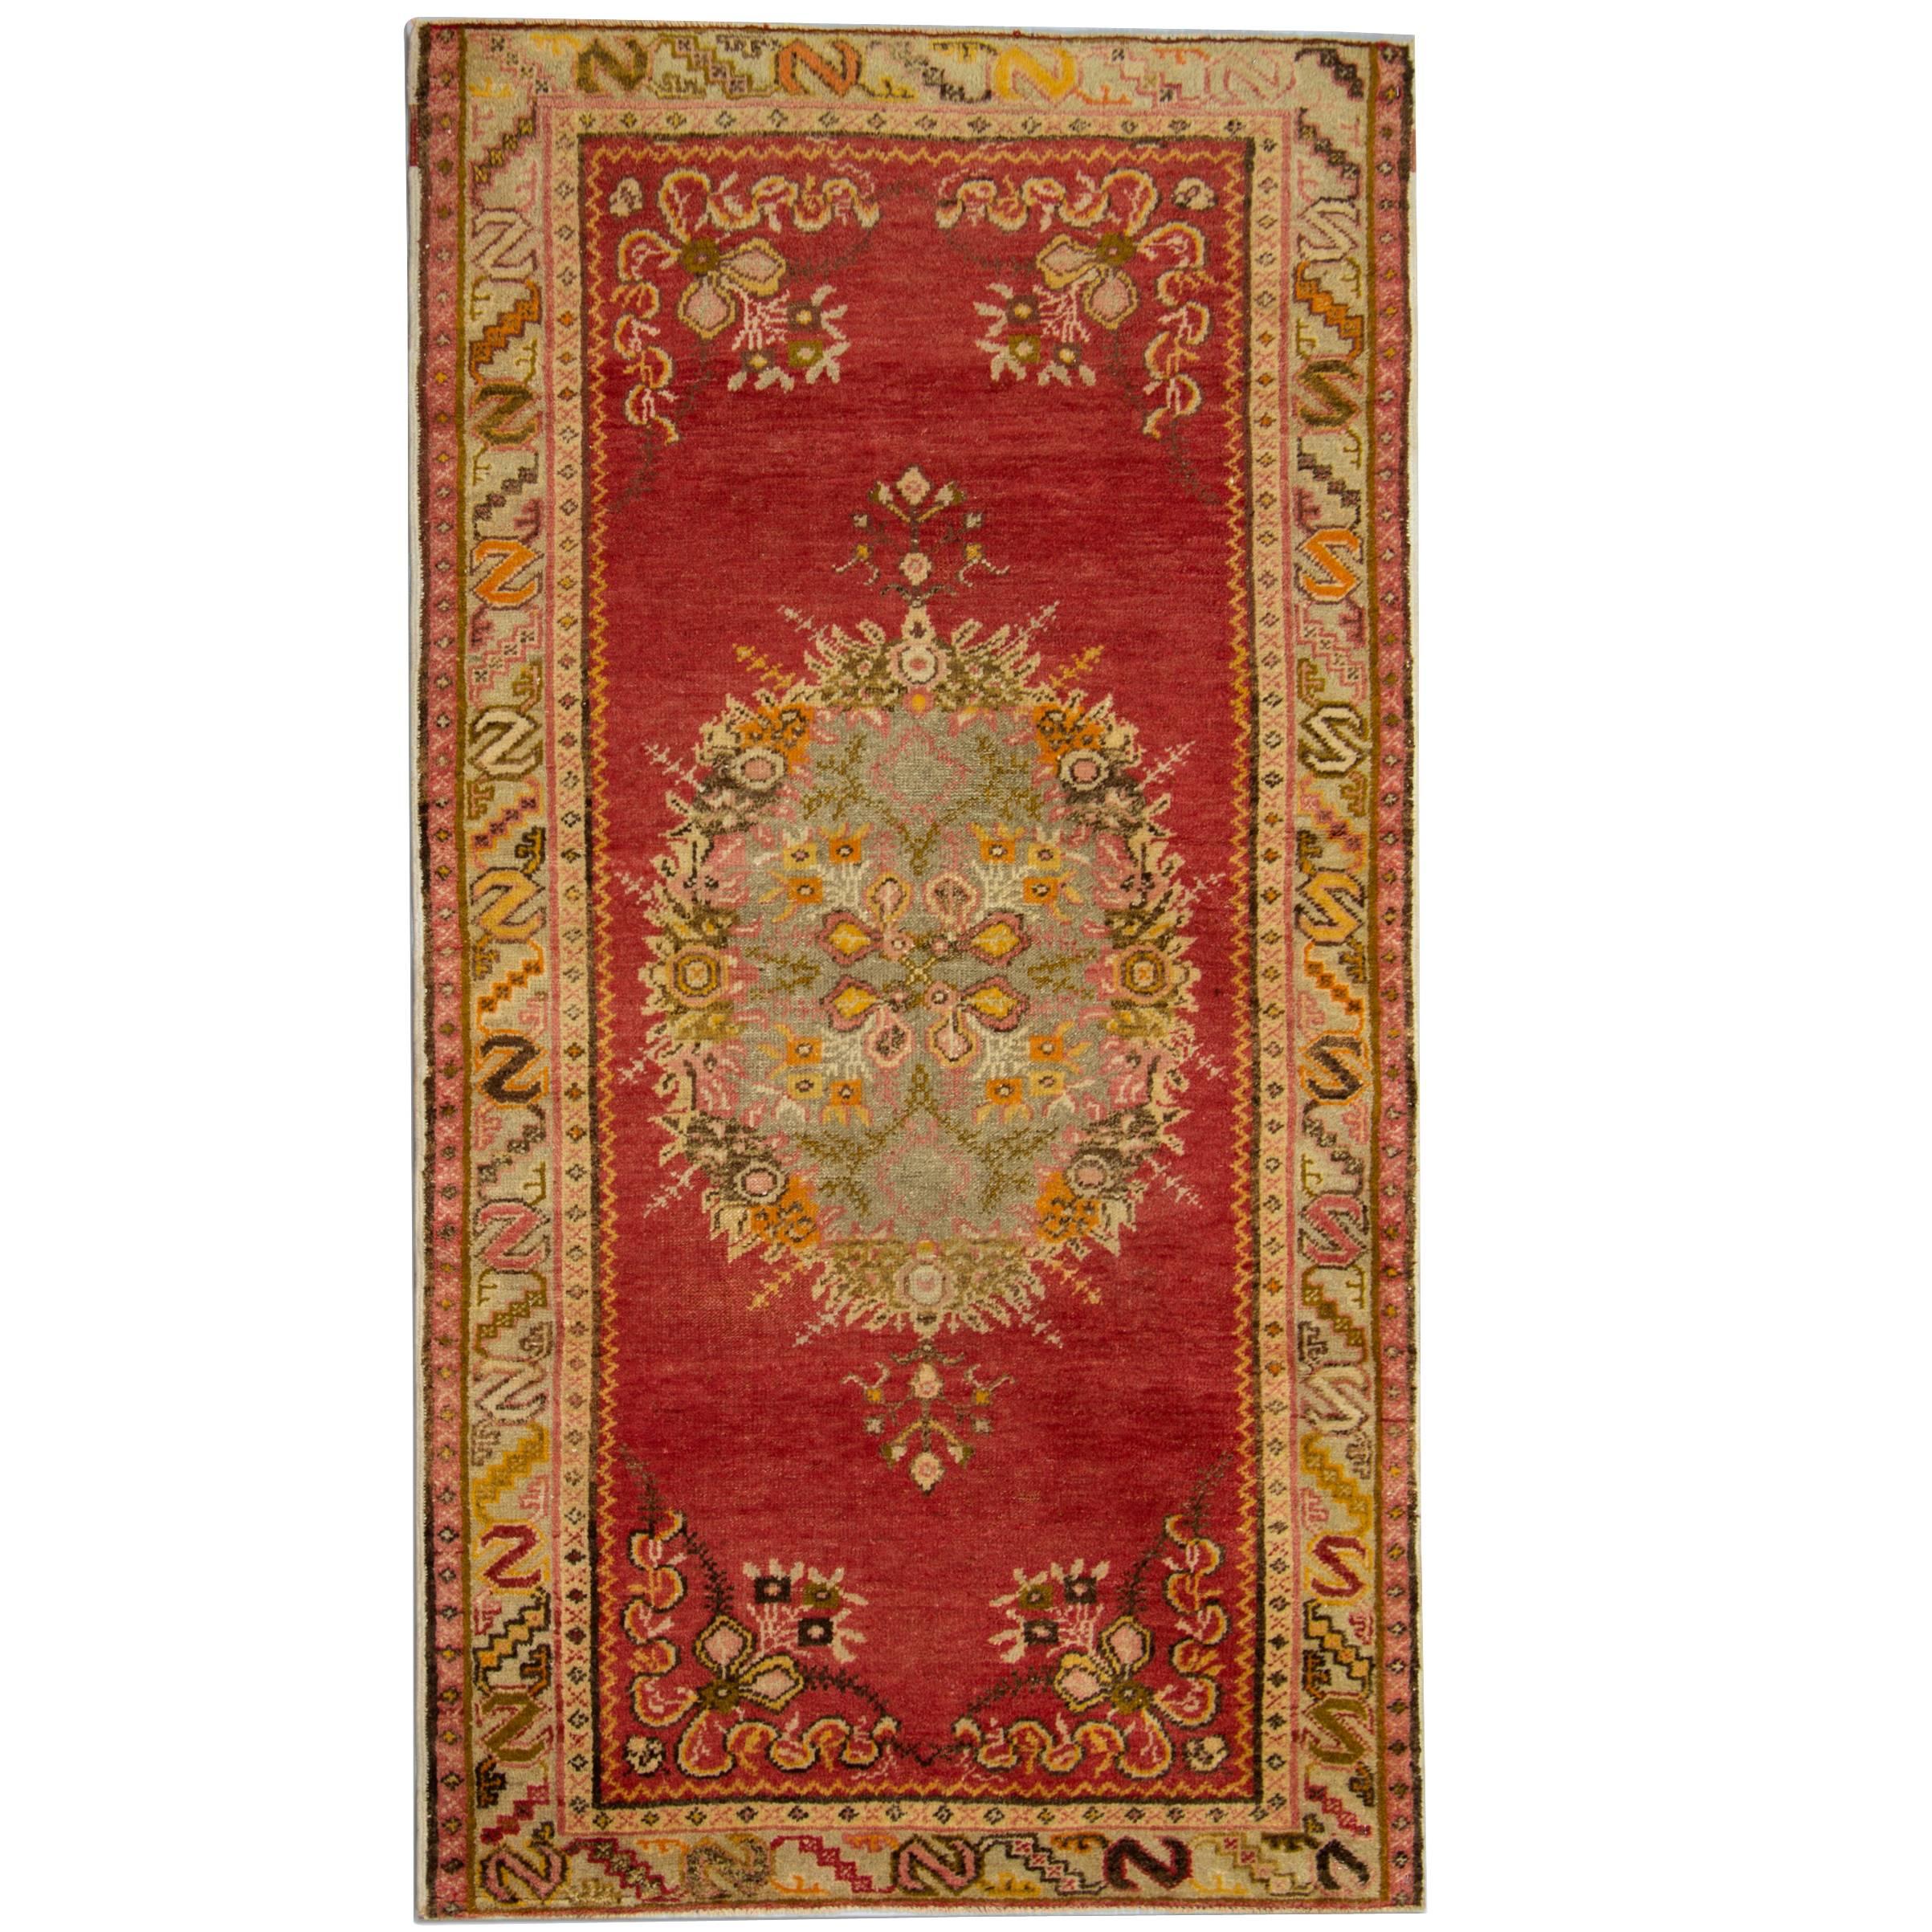 Handmade Carpet Antique Rugs, Turkish Rug, luxury Red Oriental Rugs for Sale For Sale